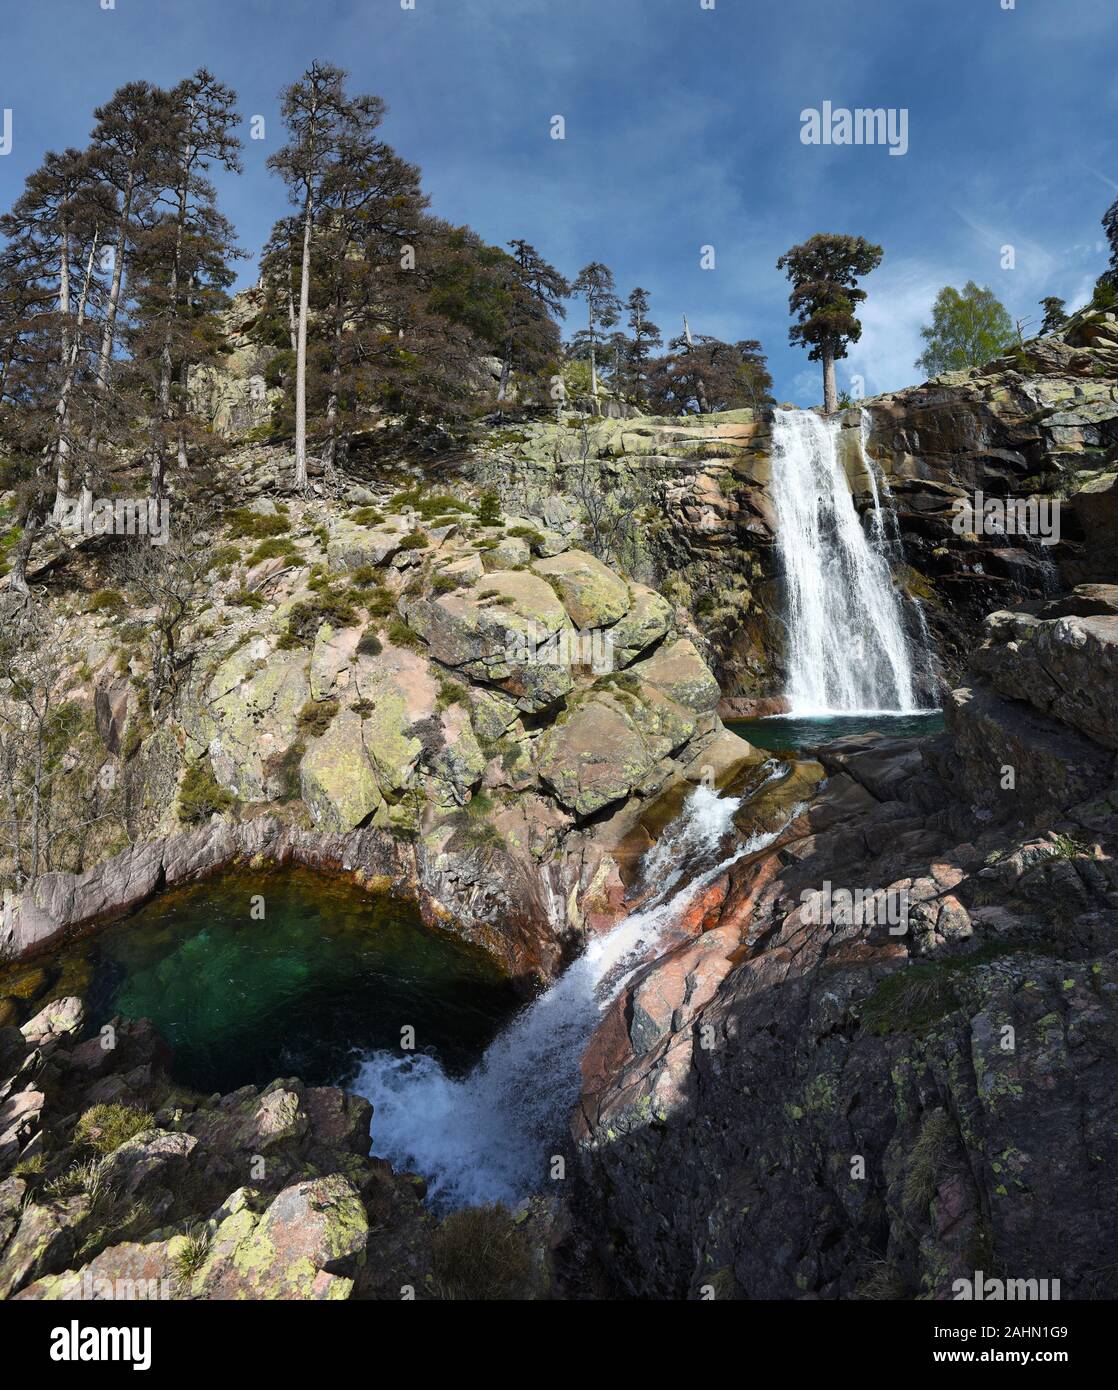 Radule waterfall in High Golo Valley of Corsica Island. Laricio pine trees of Valdo-Nielo forest are in top and two natural pools with crystalline wat Stock Photo